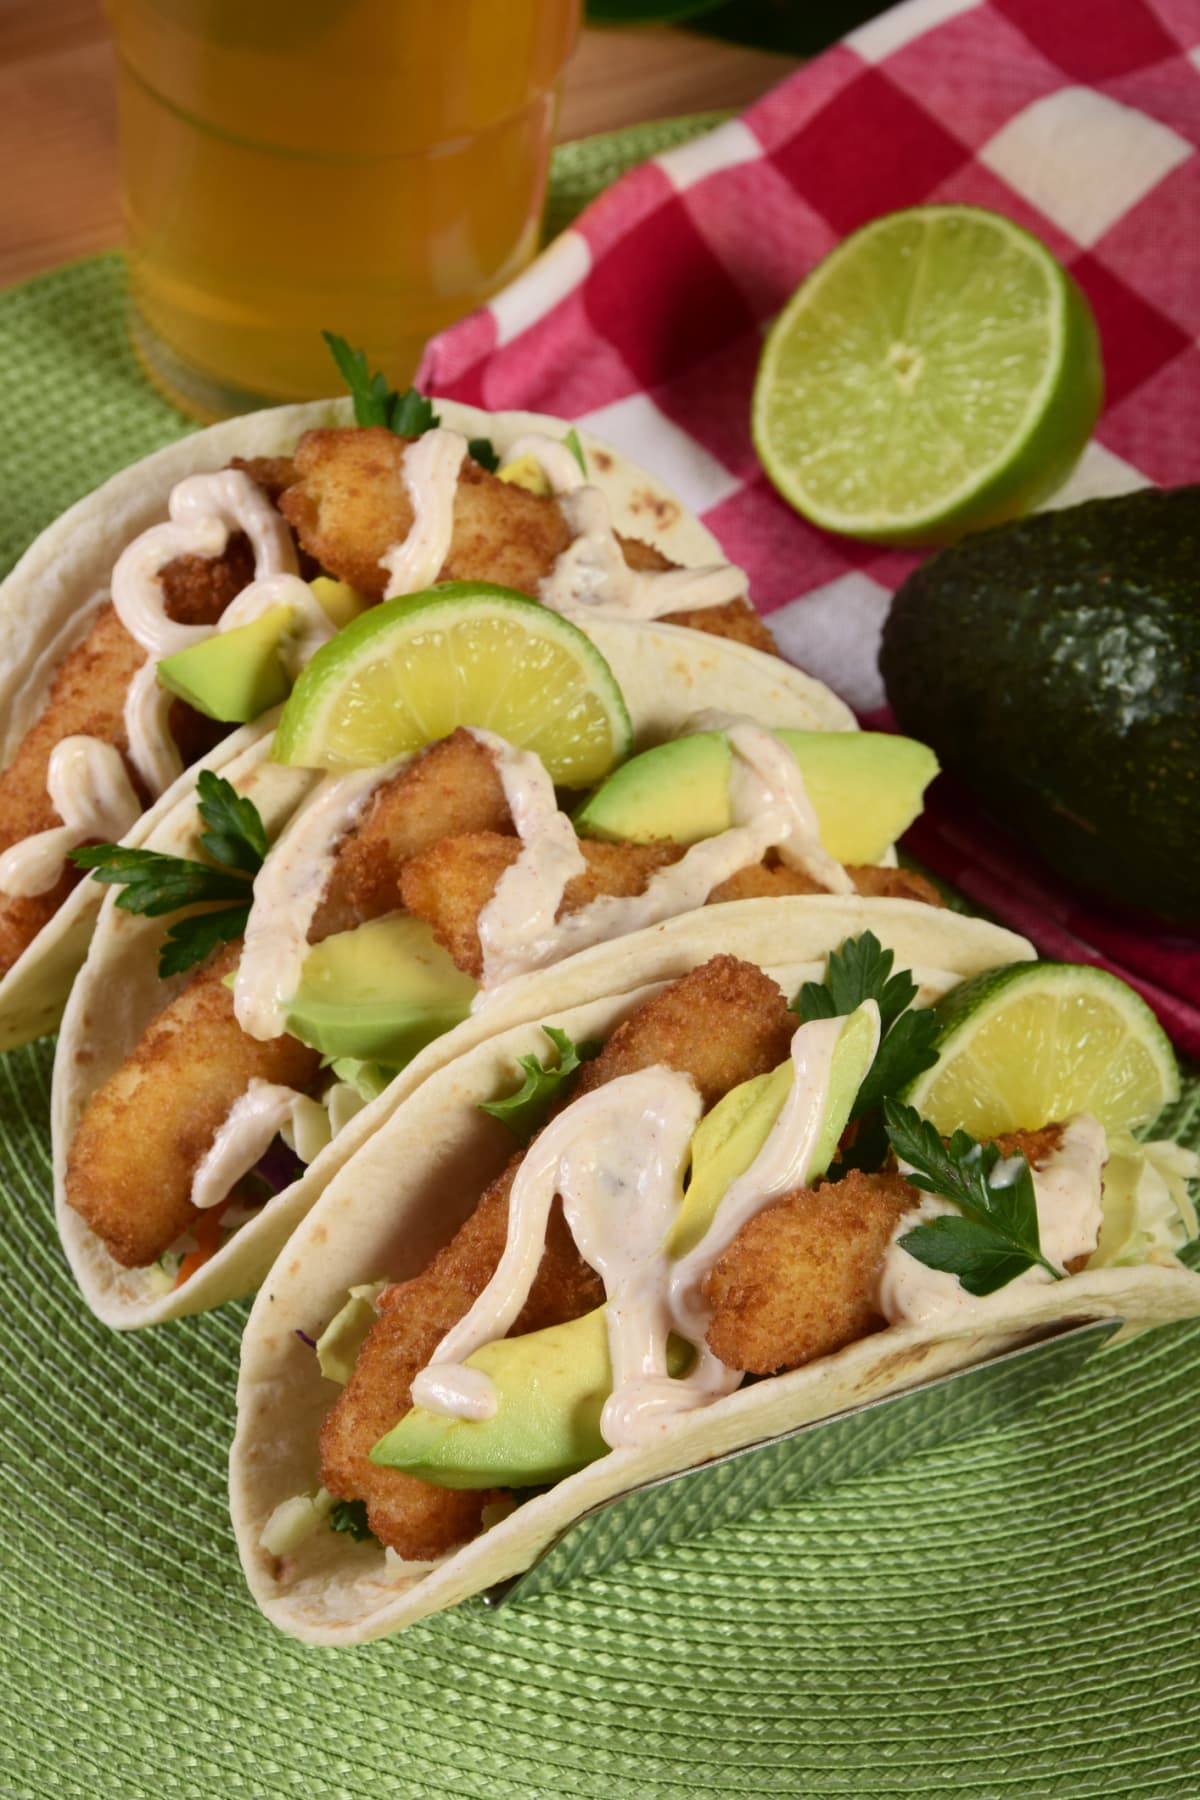 Three Baja fish tacos served with lime